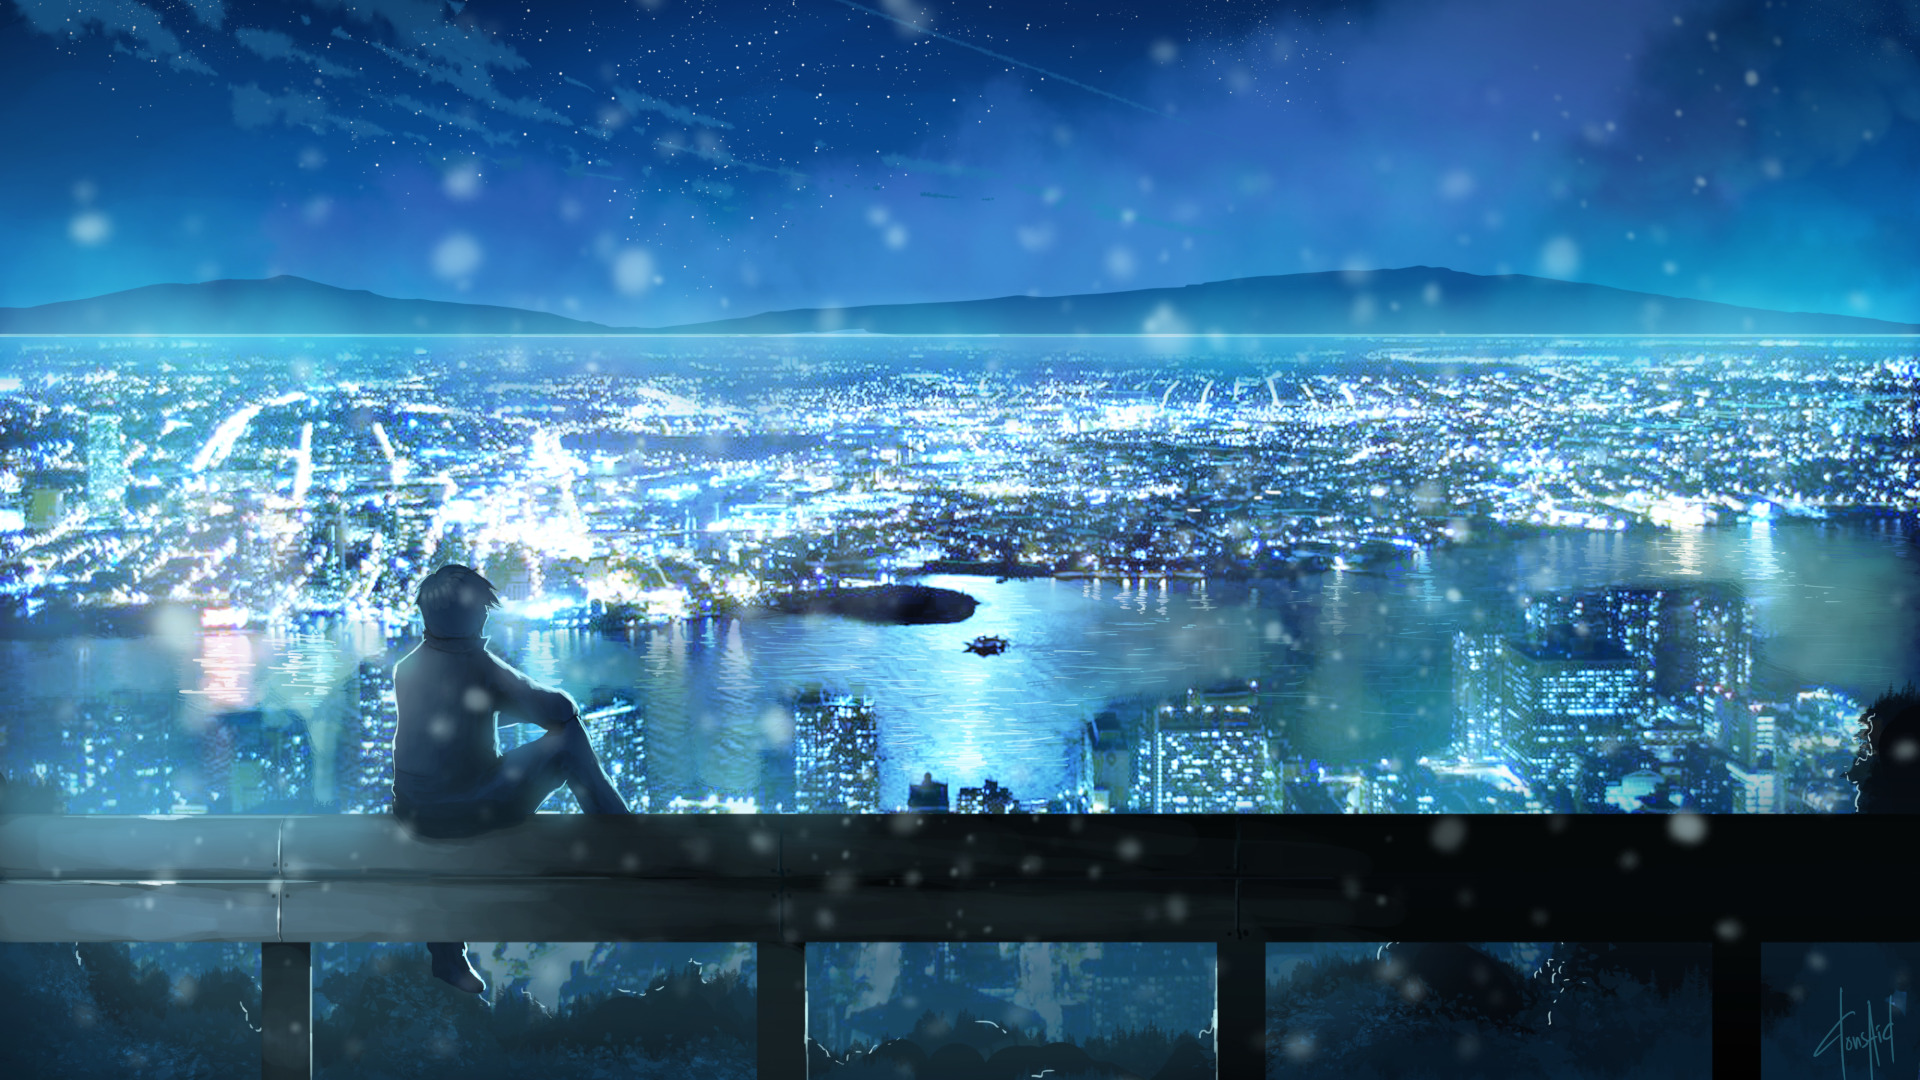 Download wallpaper the sky, stars, clouds, landscape, night, the city,  lights, anime, art, guy, dias mardianto, donsaid, section shonen in  resolution 1920x1080